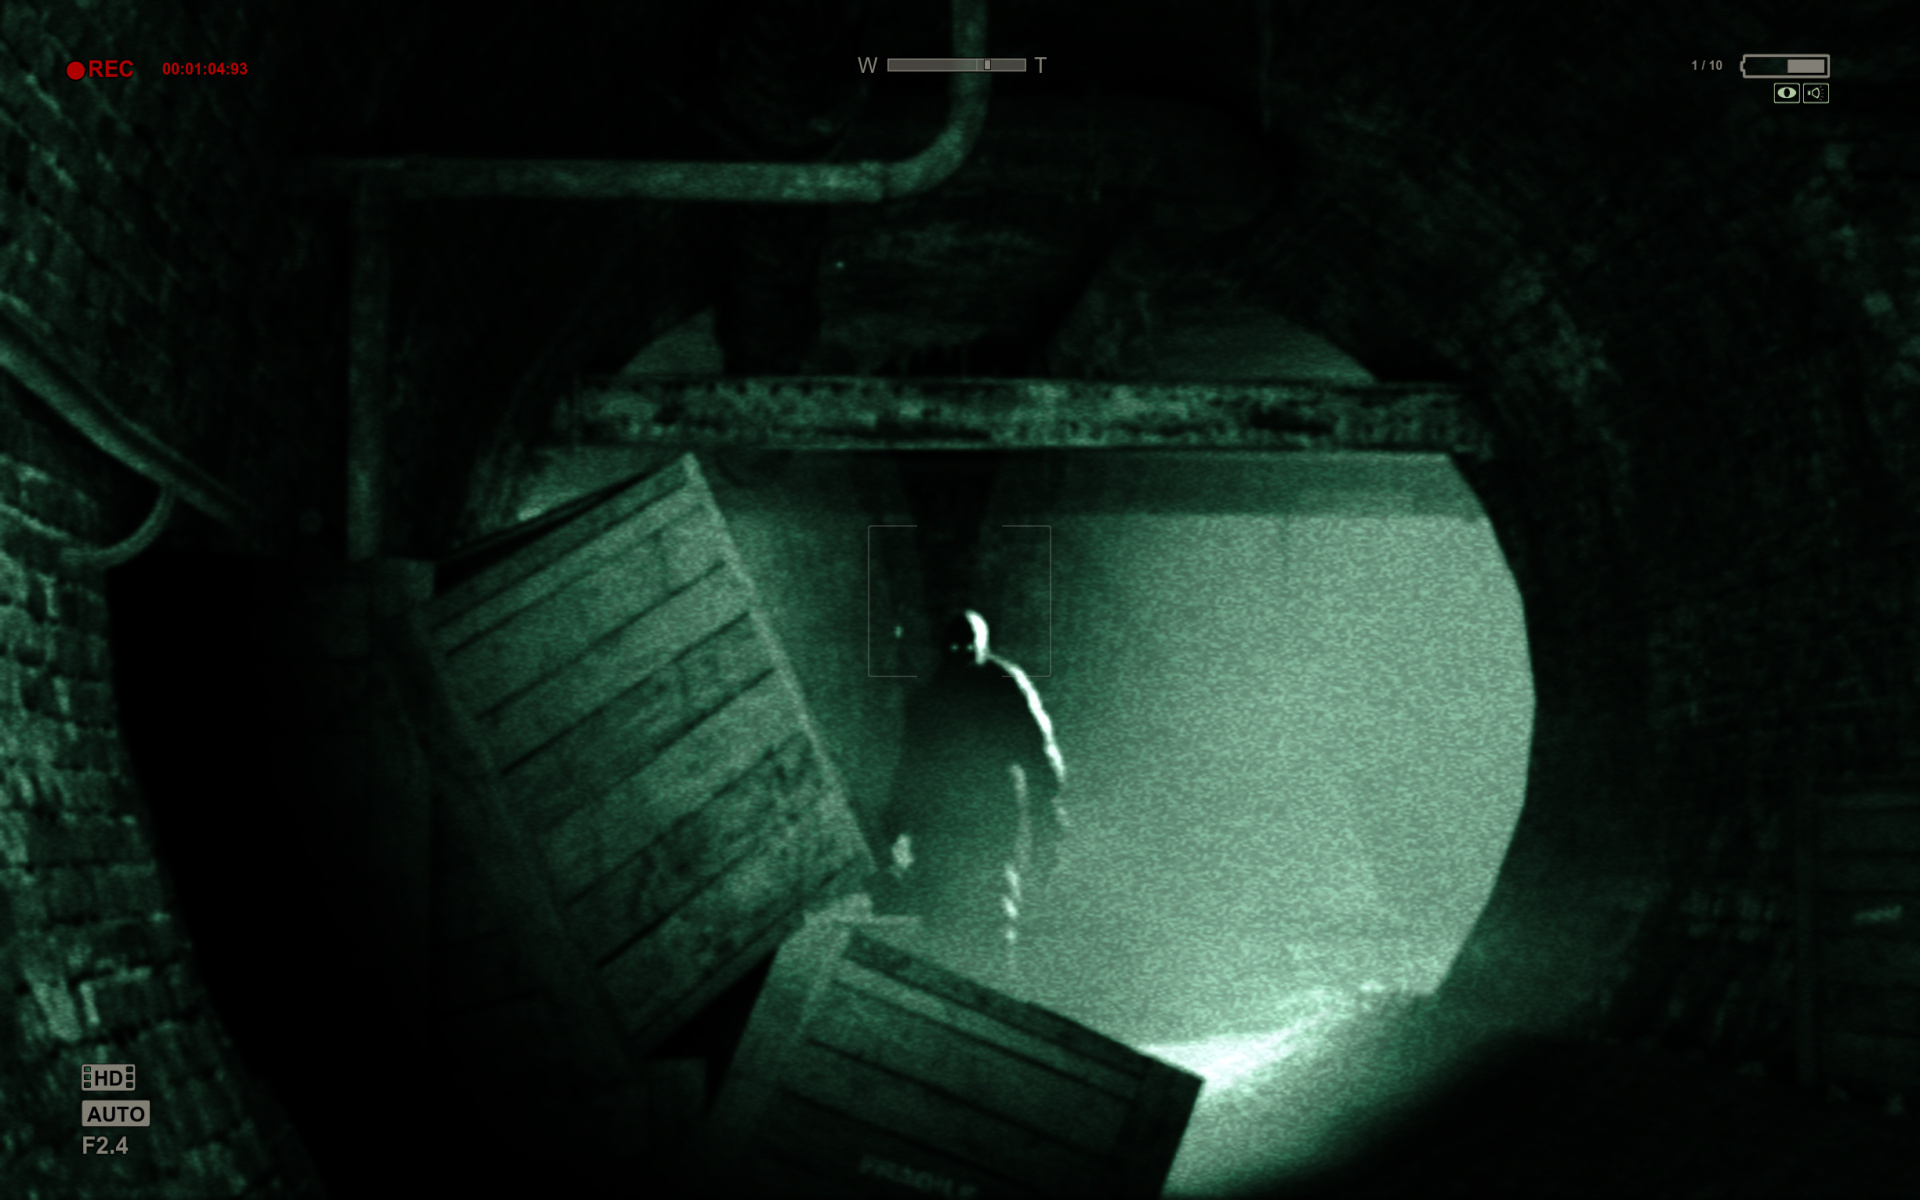 download outlast 2 xbox one for free